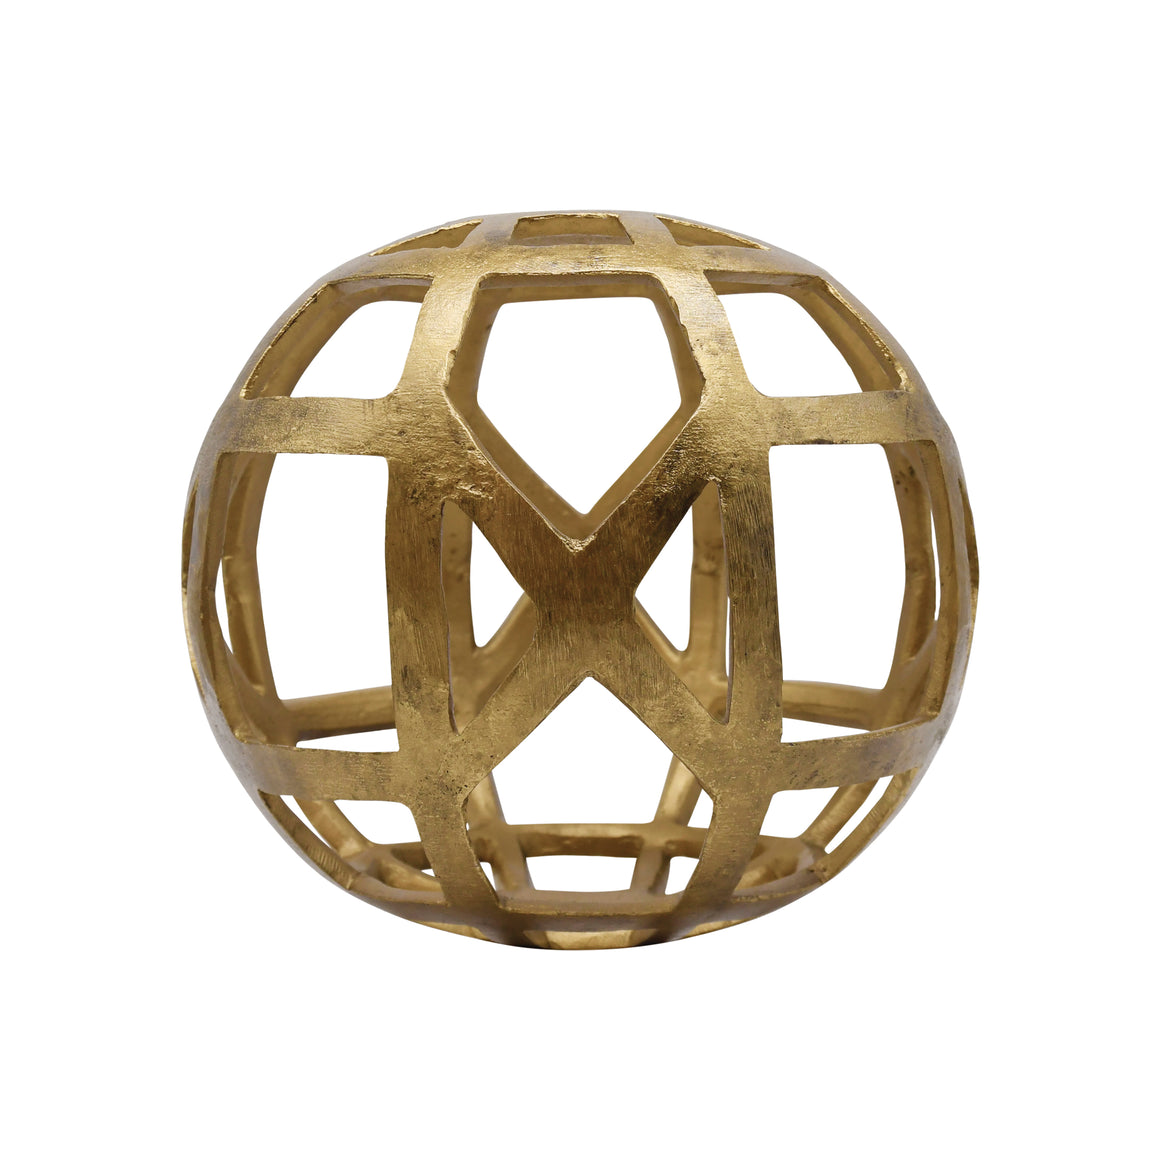 Paxton Small Round Metal Ball with Geo Cutouts in Textured Brass